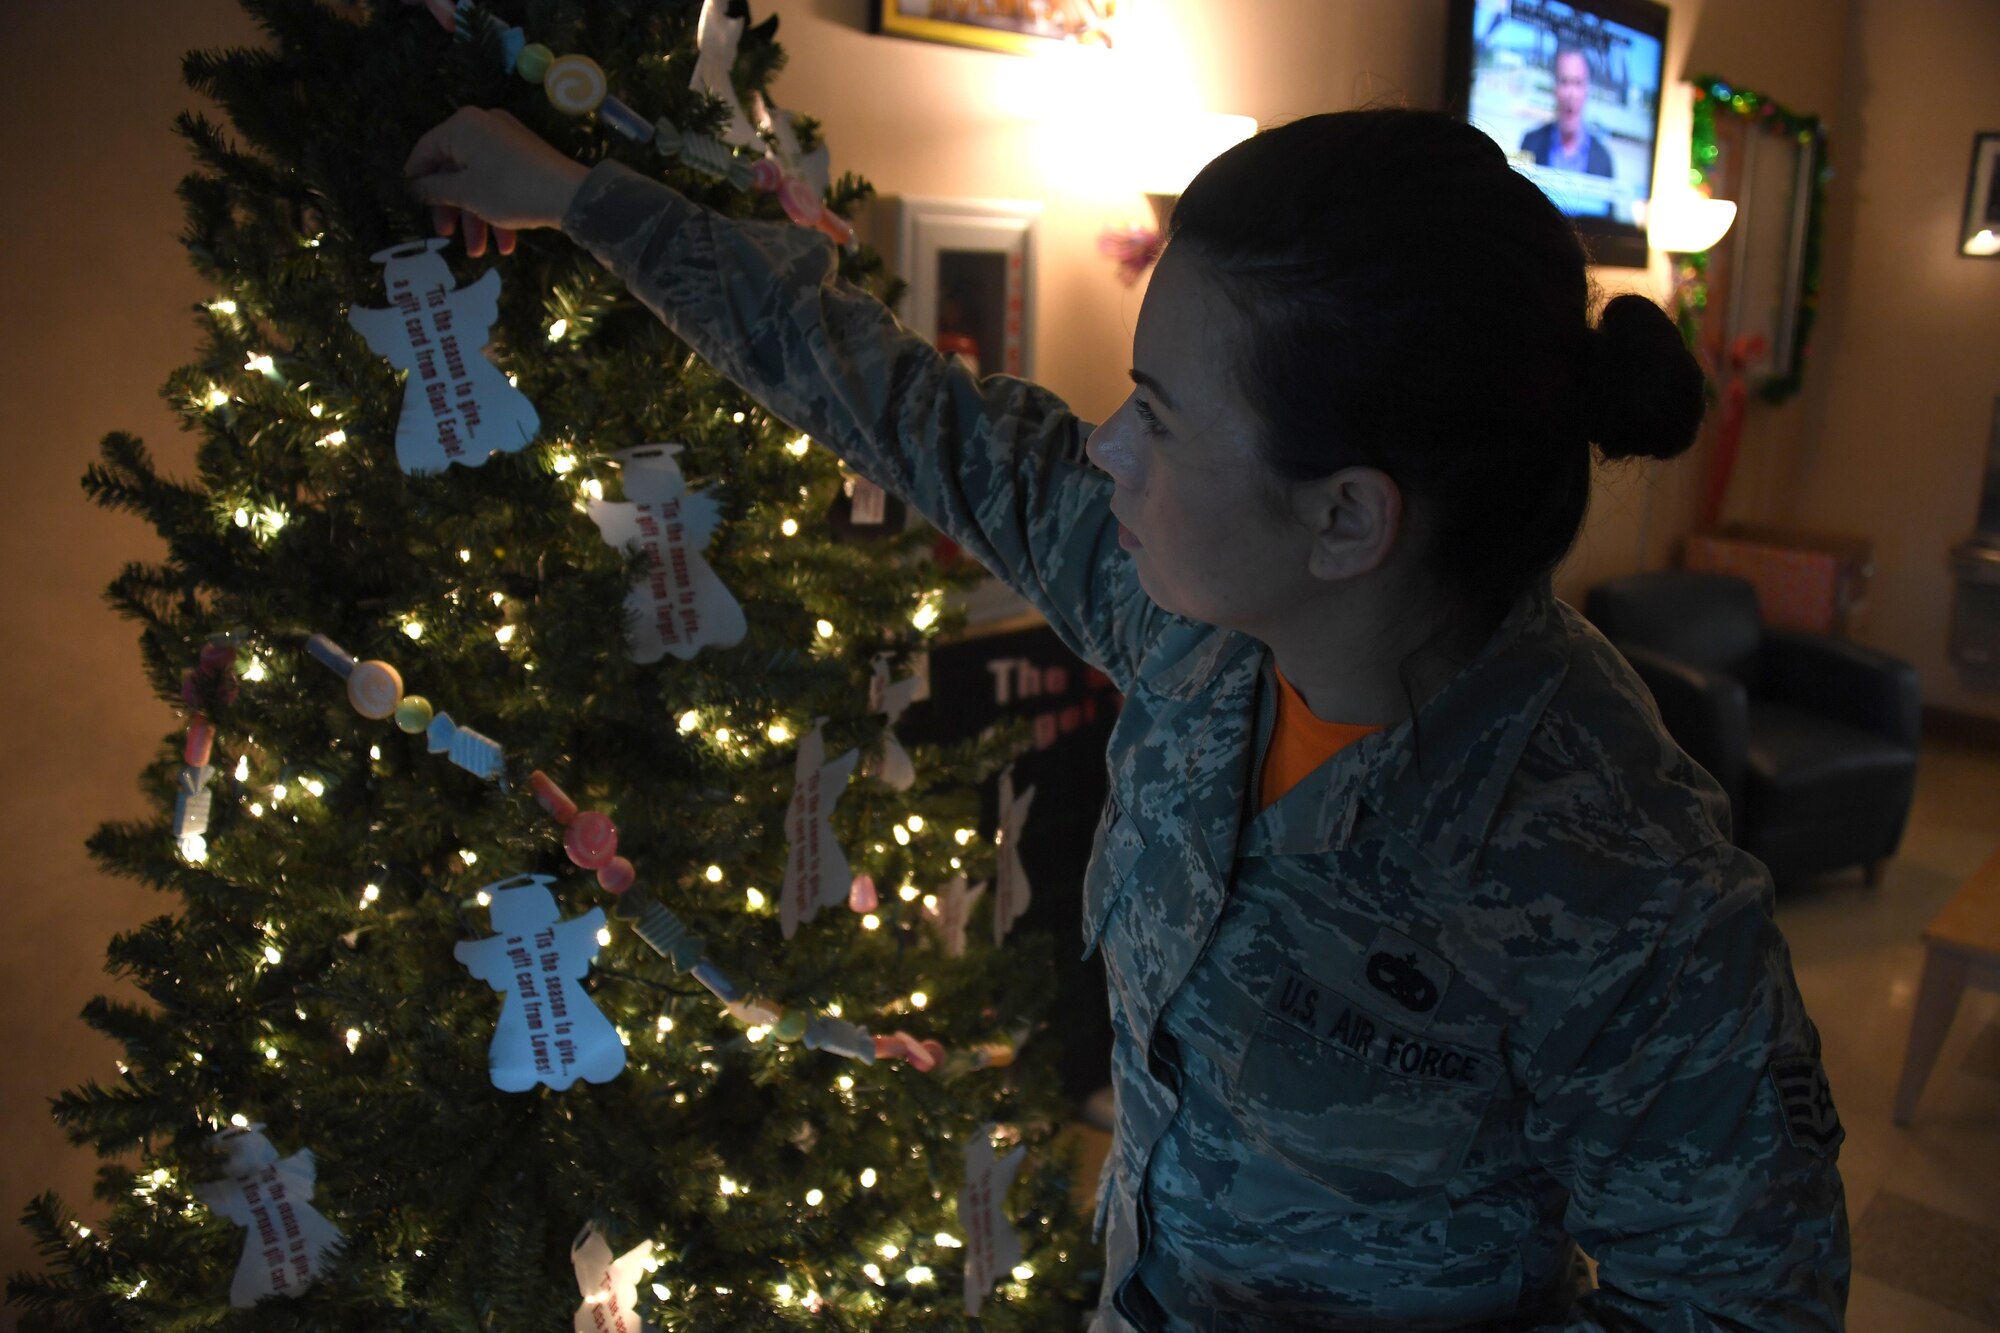 Staff Sgt. Ashley Wiley, aircraft structural maintenance technician and Angel Tree program manager with the 911th Airlift Wing, replaces an ornament on the Angel Tree in the fitness center lobby at the Pittsburgh International Airport Air Reserve Station, Dec. 4, 2016. Wiley has managed the Angel Tree program for three years and has coordinated more than $7,000 in donations for Airmen in need. (U.S. Air Force photo by Staff Sgt. Marjorie A. Bowlden)